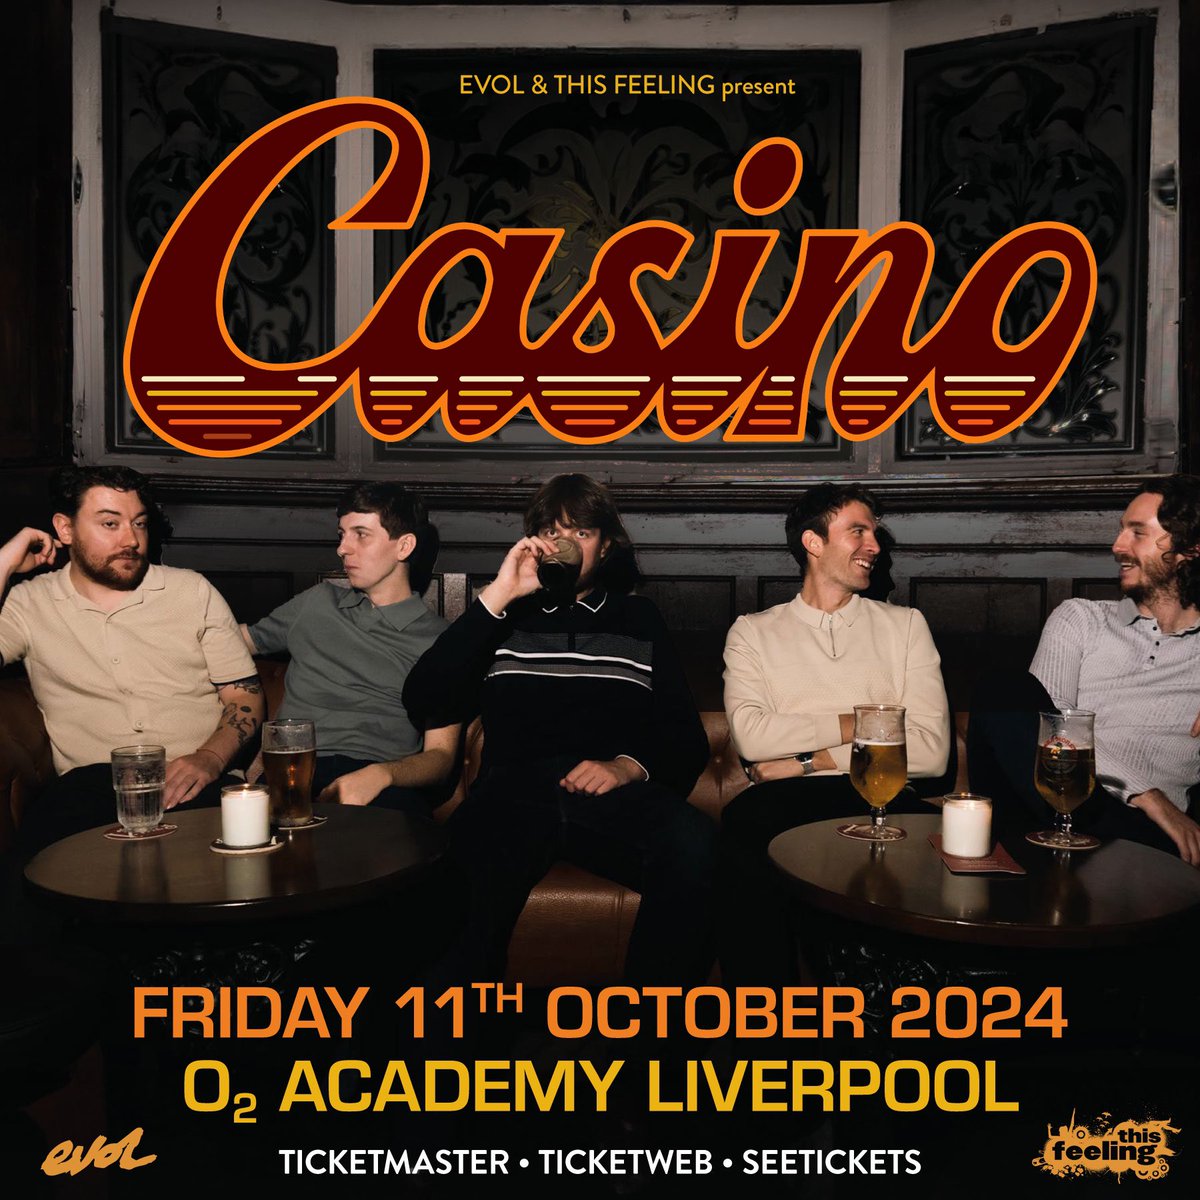 𝐁𝐈𝐆𝐆𝐄𝐒𝐓 𝐇𝐎𝐌𝐄 𝐇𝐄𝐀𝐃𝐋𝐈𝐍𝐄 𝐒𝐇𝐎𝐖 The sublime soulful indie groove machine @Casino_band_ play their 𝐁𝐈𝐆𝐆𝐄𝐒𝐓 home headline show to date, Friday October 11th at @O2AcademyLpool! Get tickets: seetickets.com/event/casino/o… 📸 @BrianSaylePhoto @SoundsLiverpool